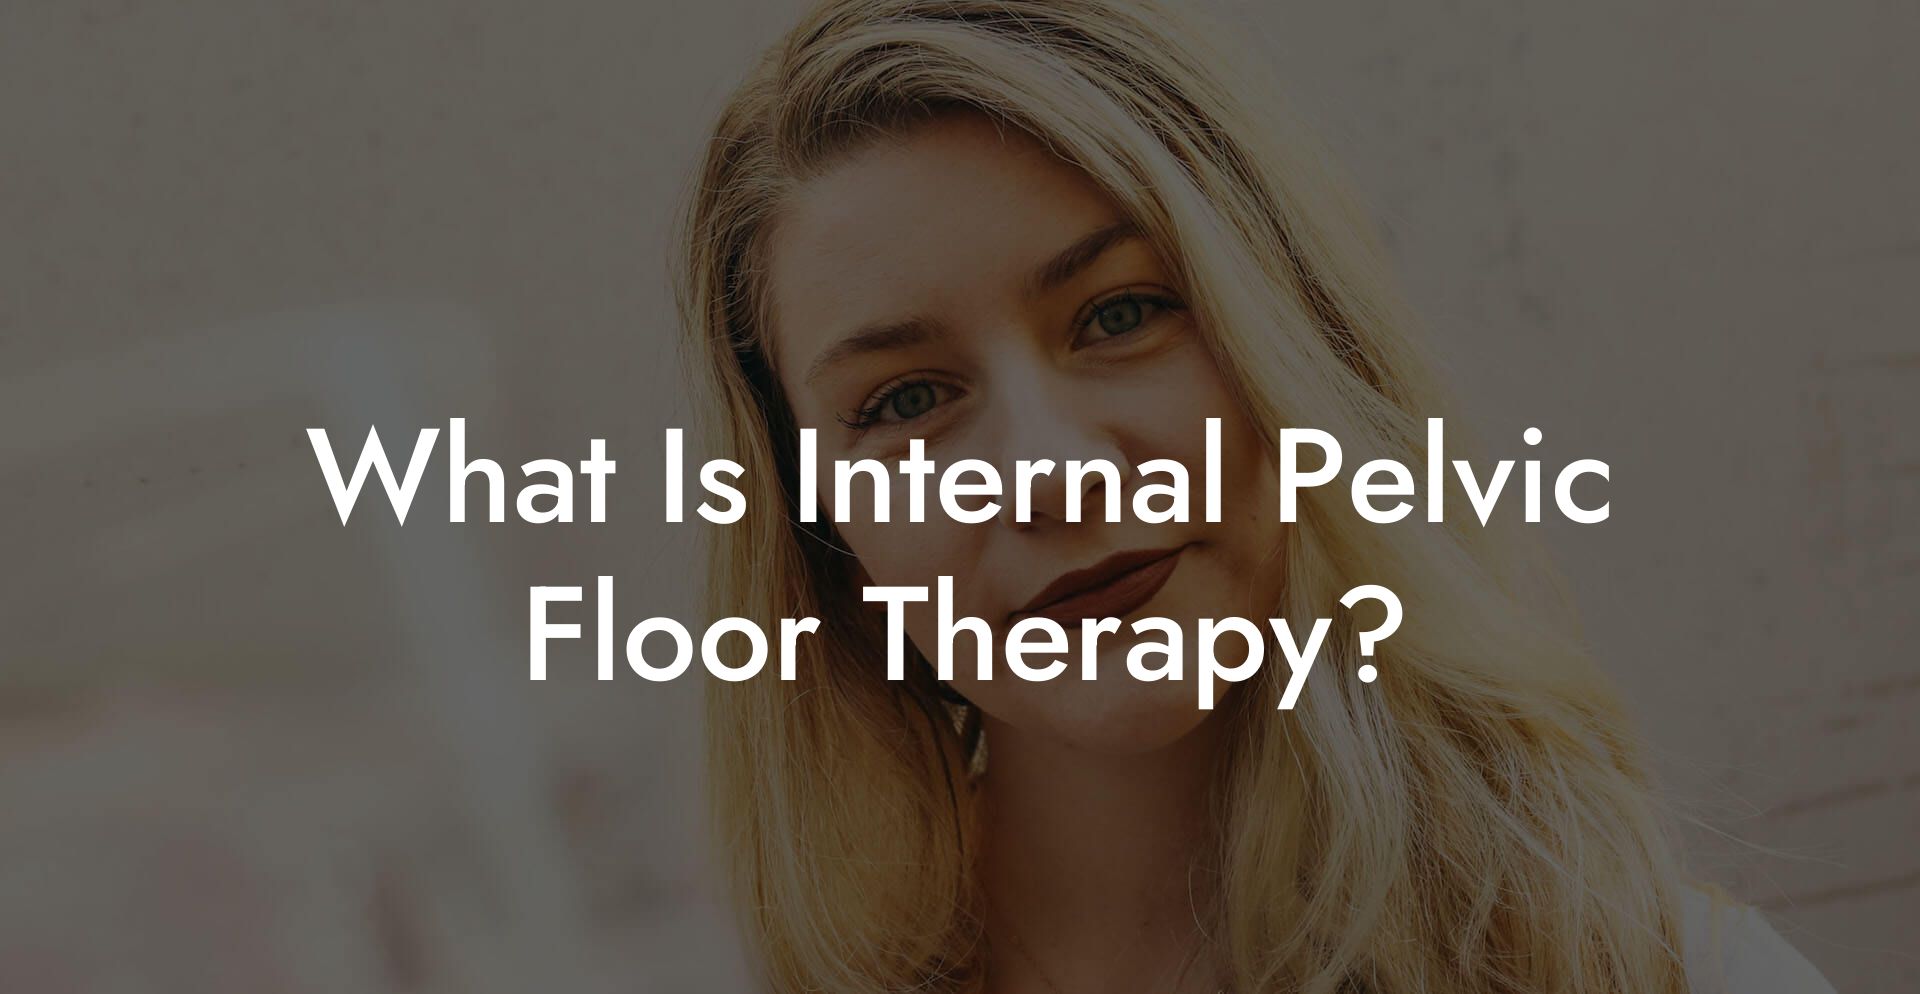 What Is Internal Pelvic Floor Therapy?